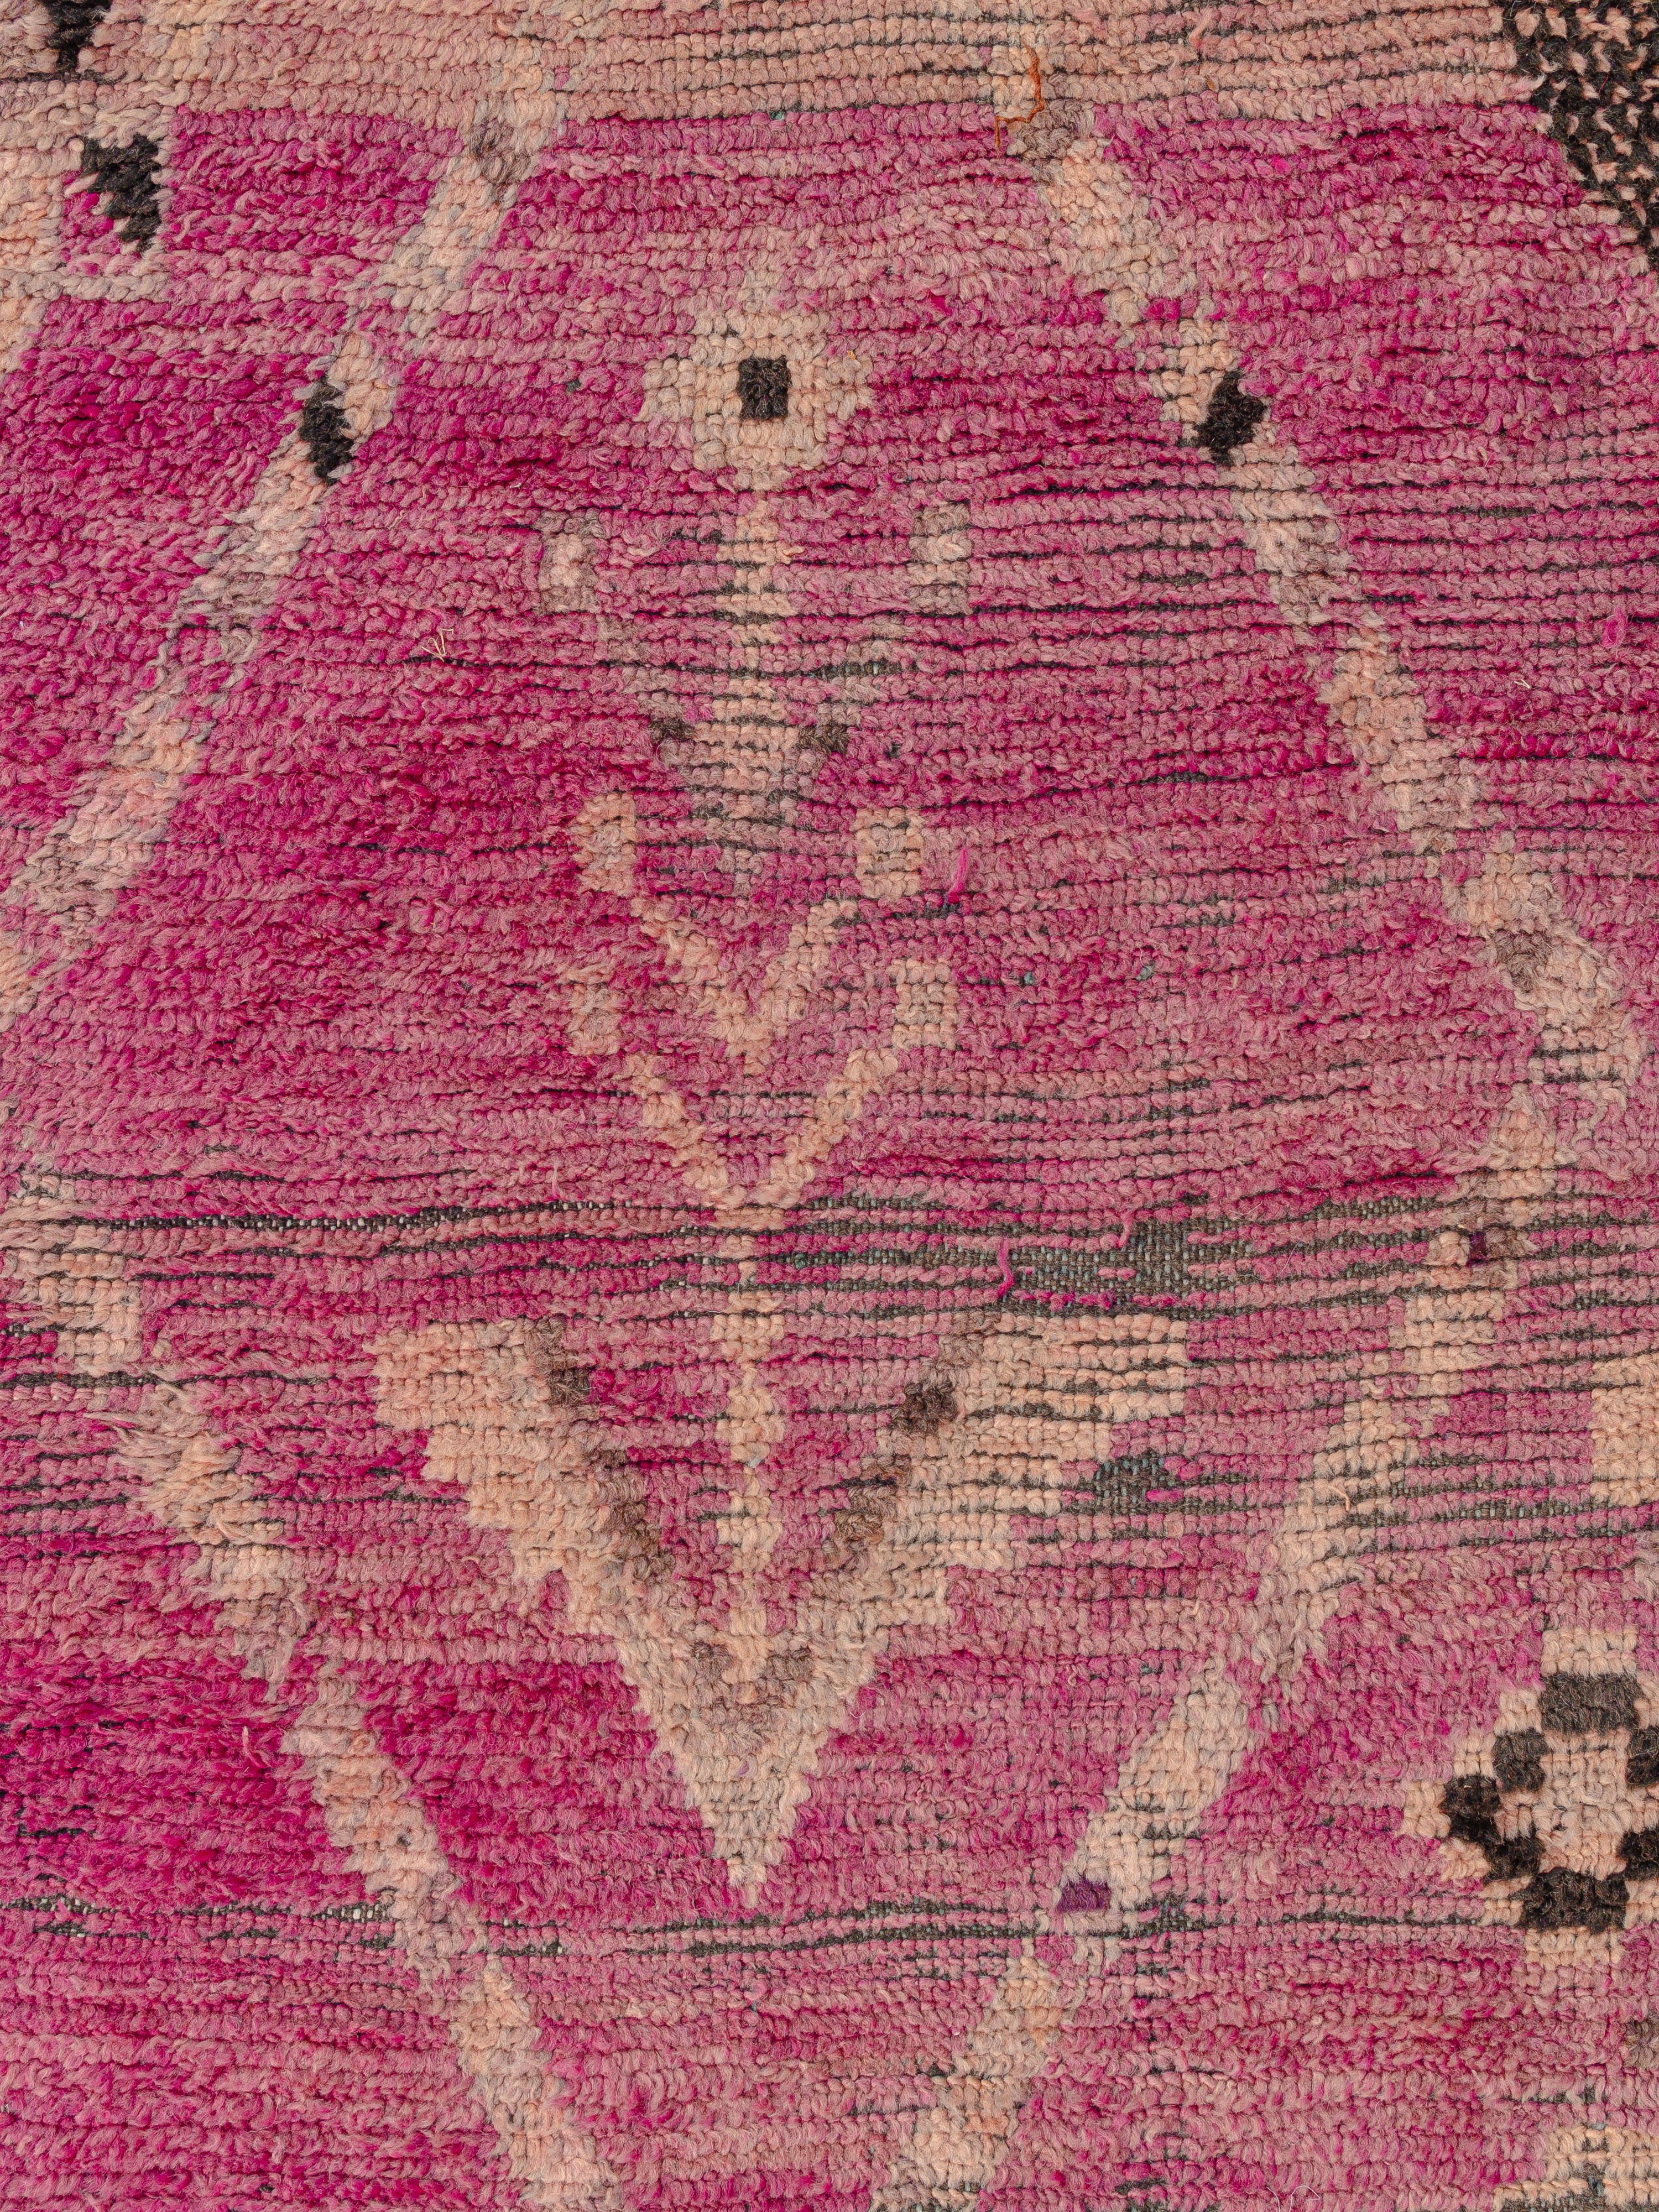 An intriguing carpet from the plains region southwest of Marrakech full of character and a well loved patina. Two opposing double axe motifs near the center of the composition reflect a harmony between male and female symbology. They are flanked by